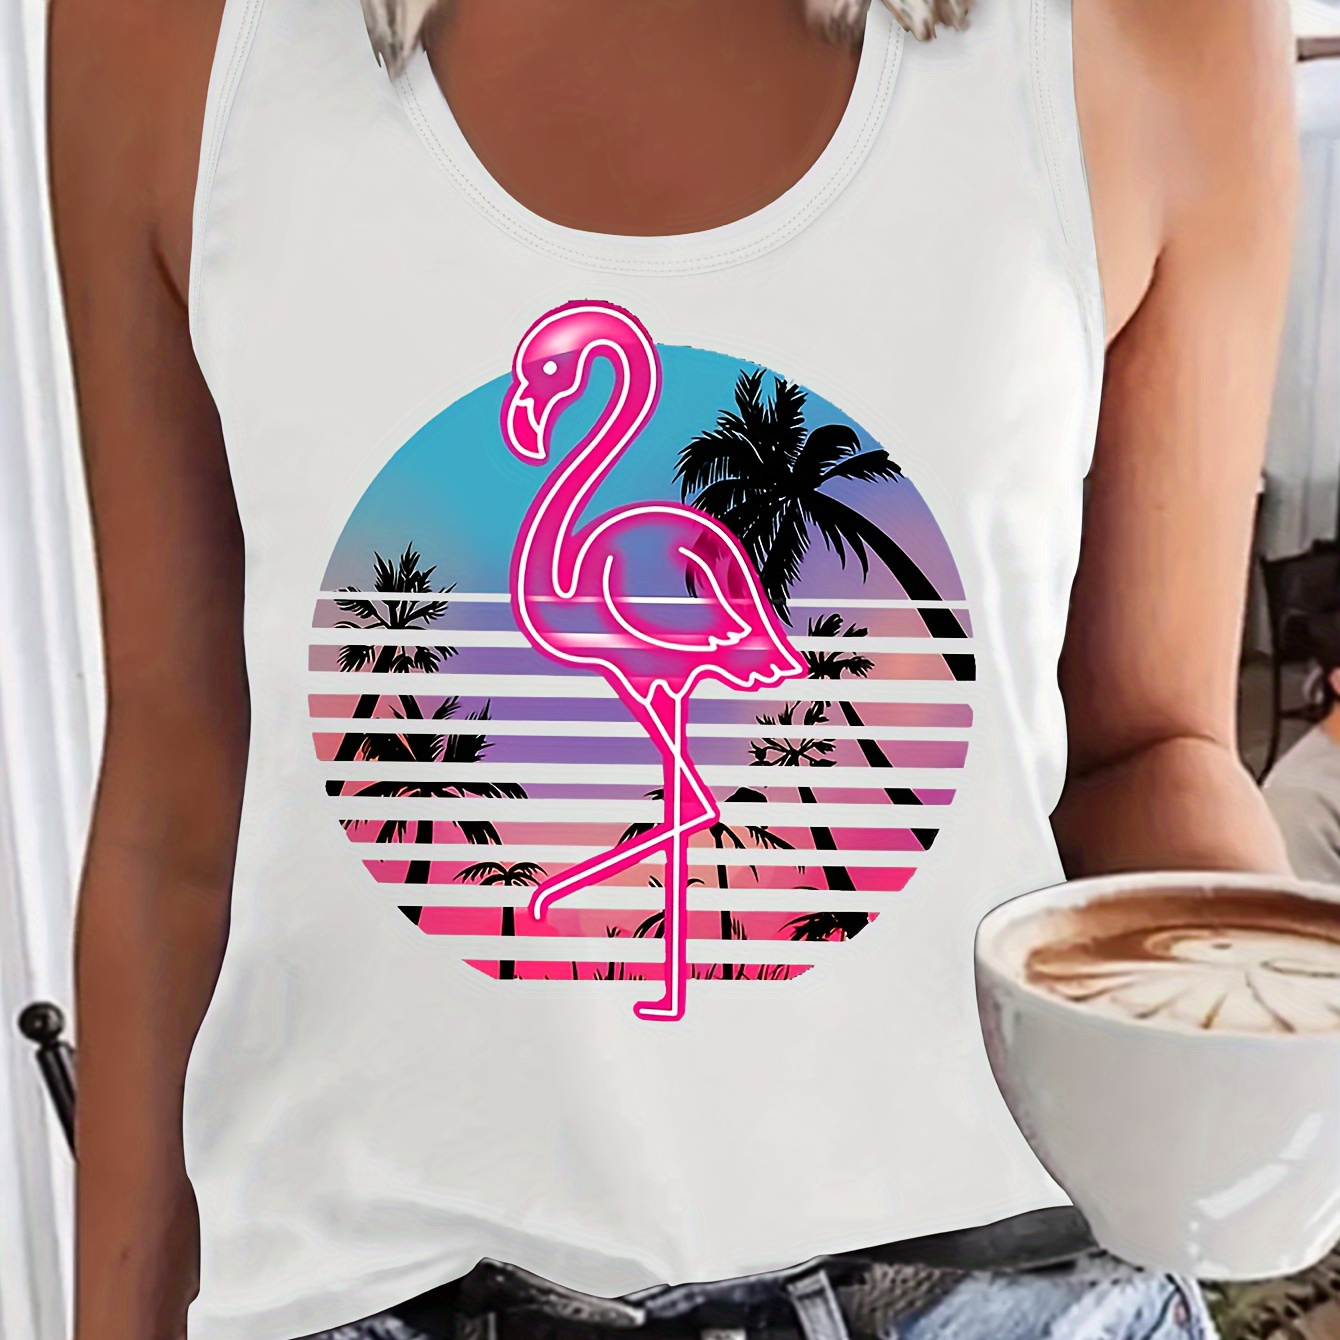 

Flamingo & Tree Print Tank Top, Sleeveless Crew Neck Casual Top For Summer & Spring, Women's Clothing